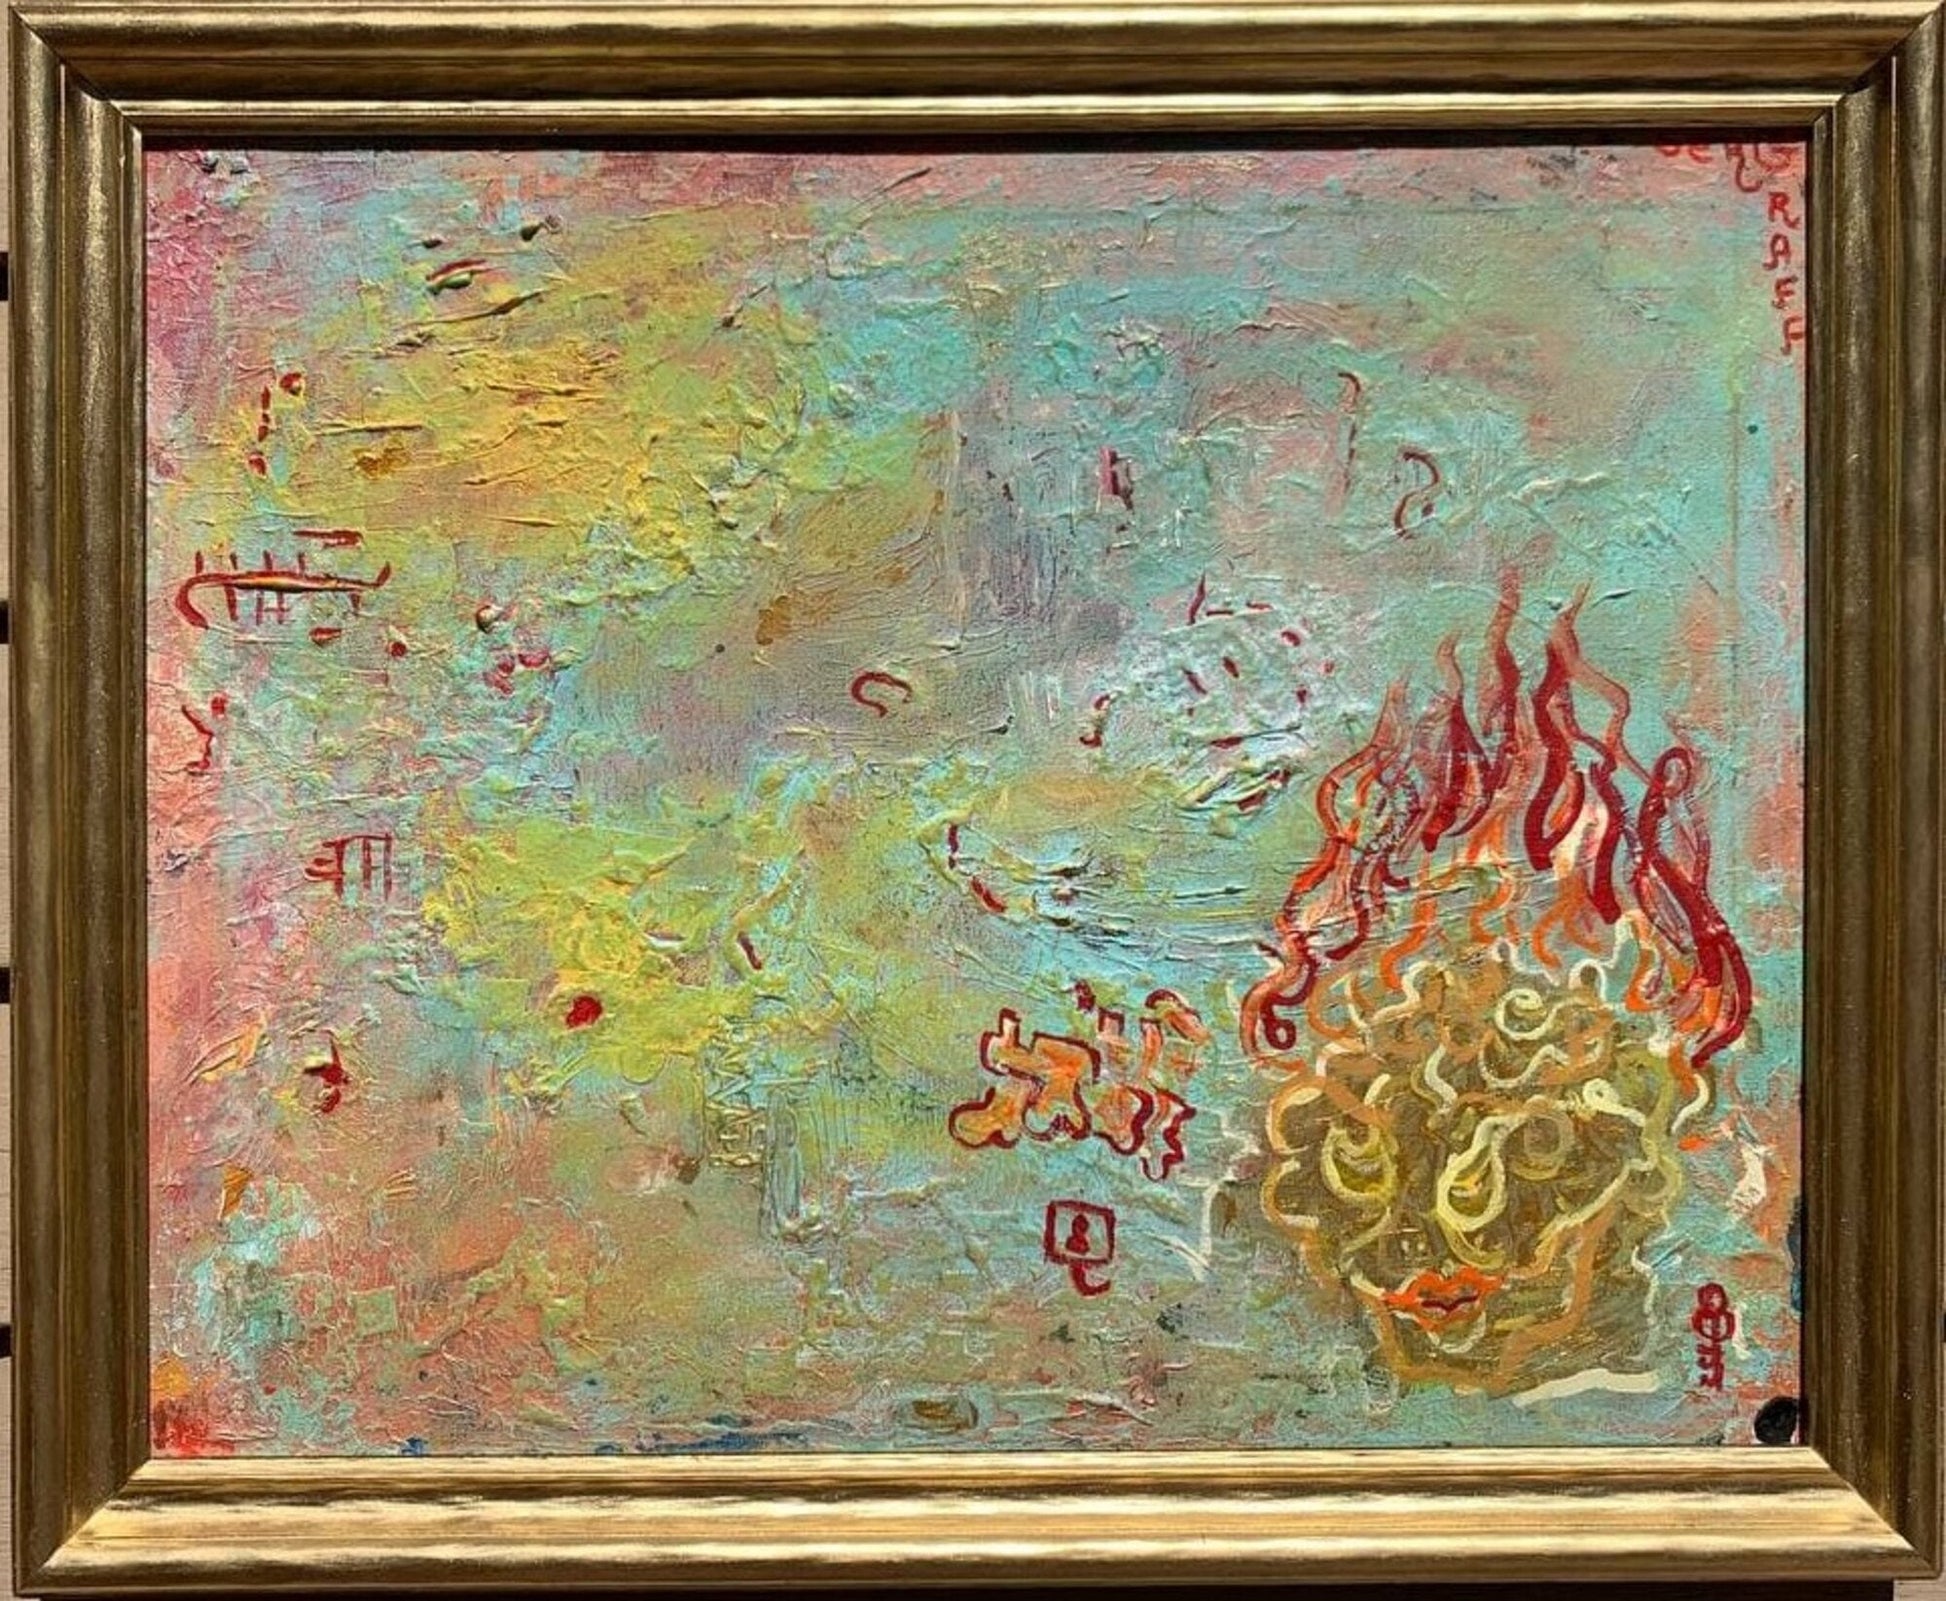 Oil Painting on Canvas, Fantasy Abstract Style, Signed S.Graff,COA Titled "Key"